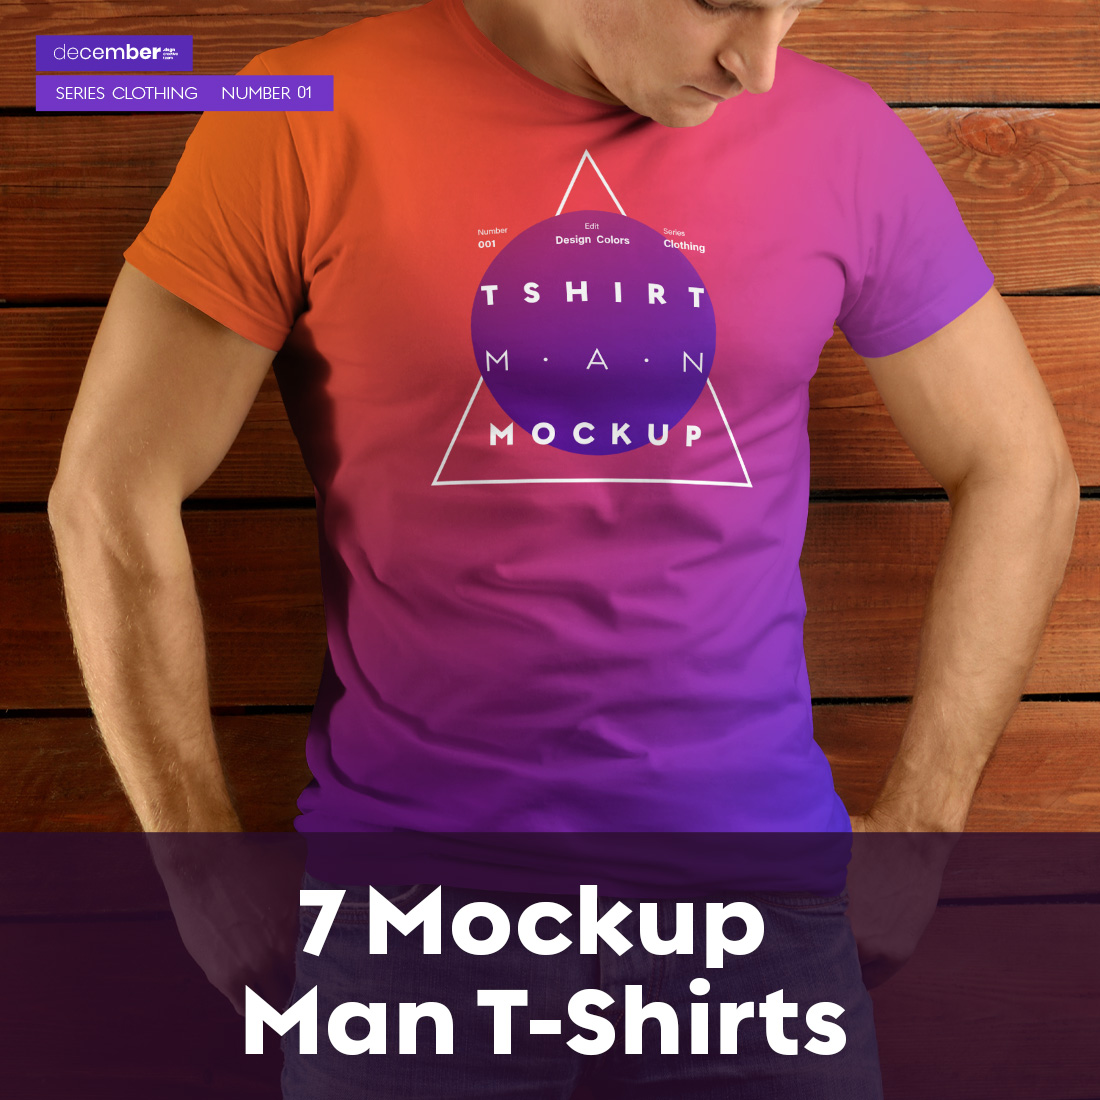 7 Mockup T-Shirt on the body of an athletic man on wooden background cover image.